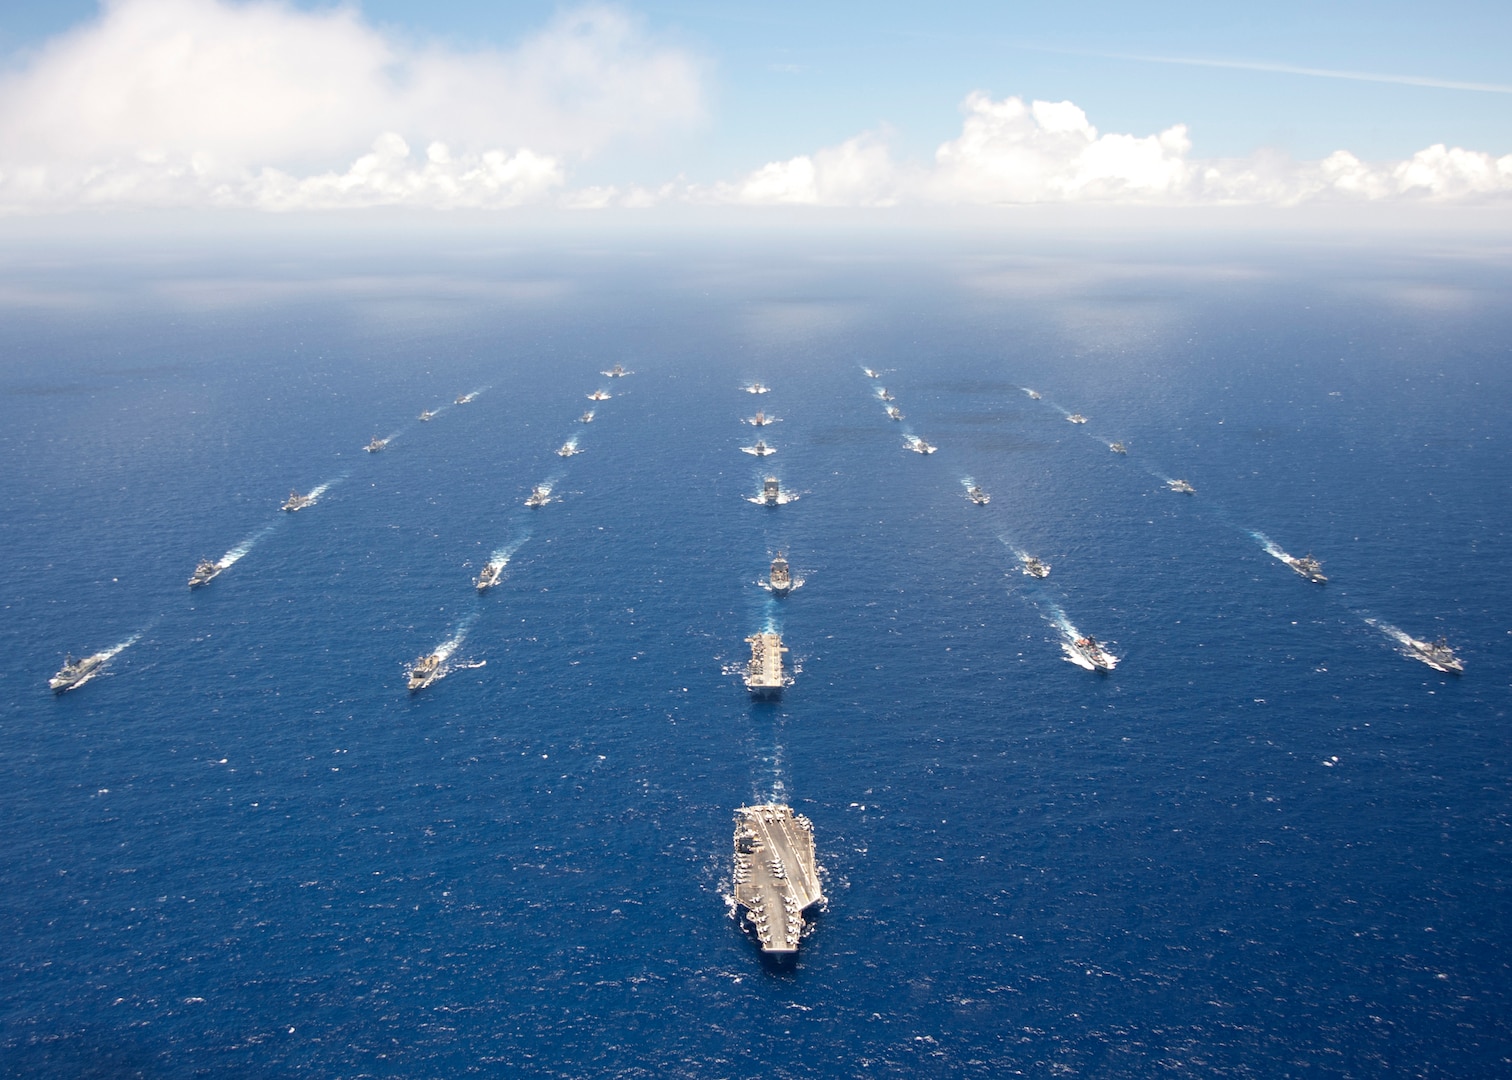 U.S. Navy Announces 26th Rim of the Pacific Exercise